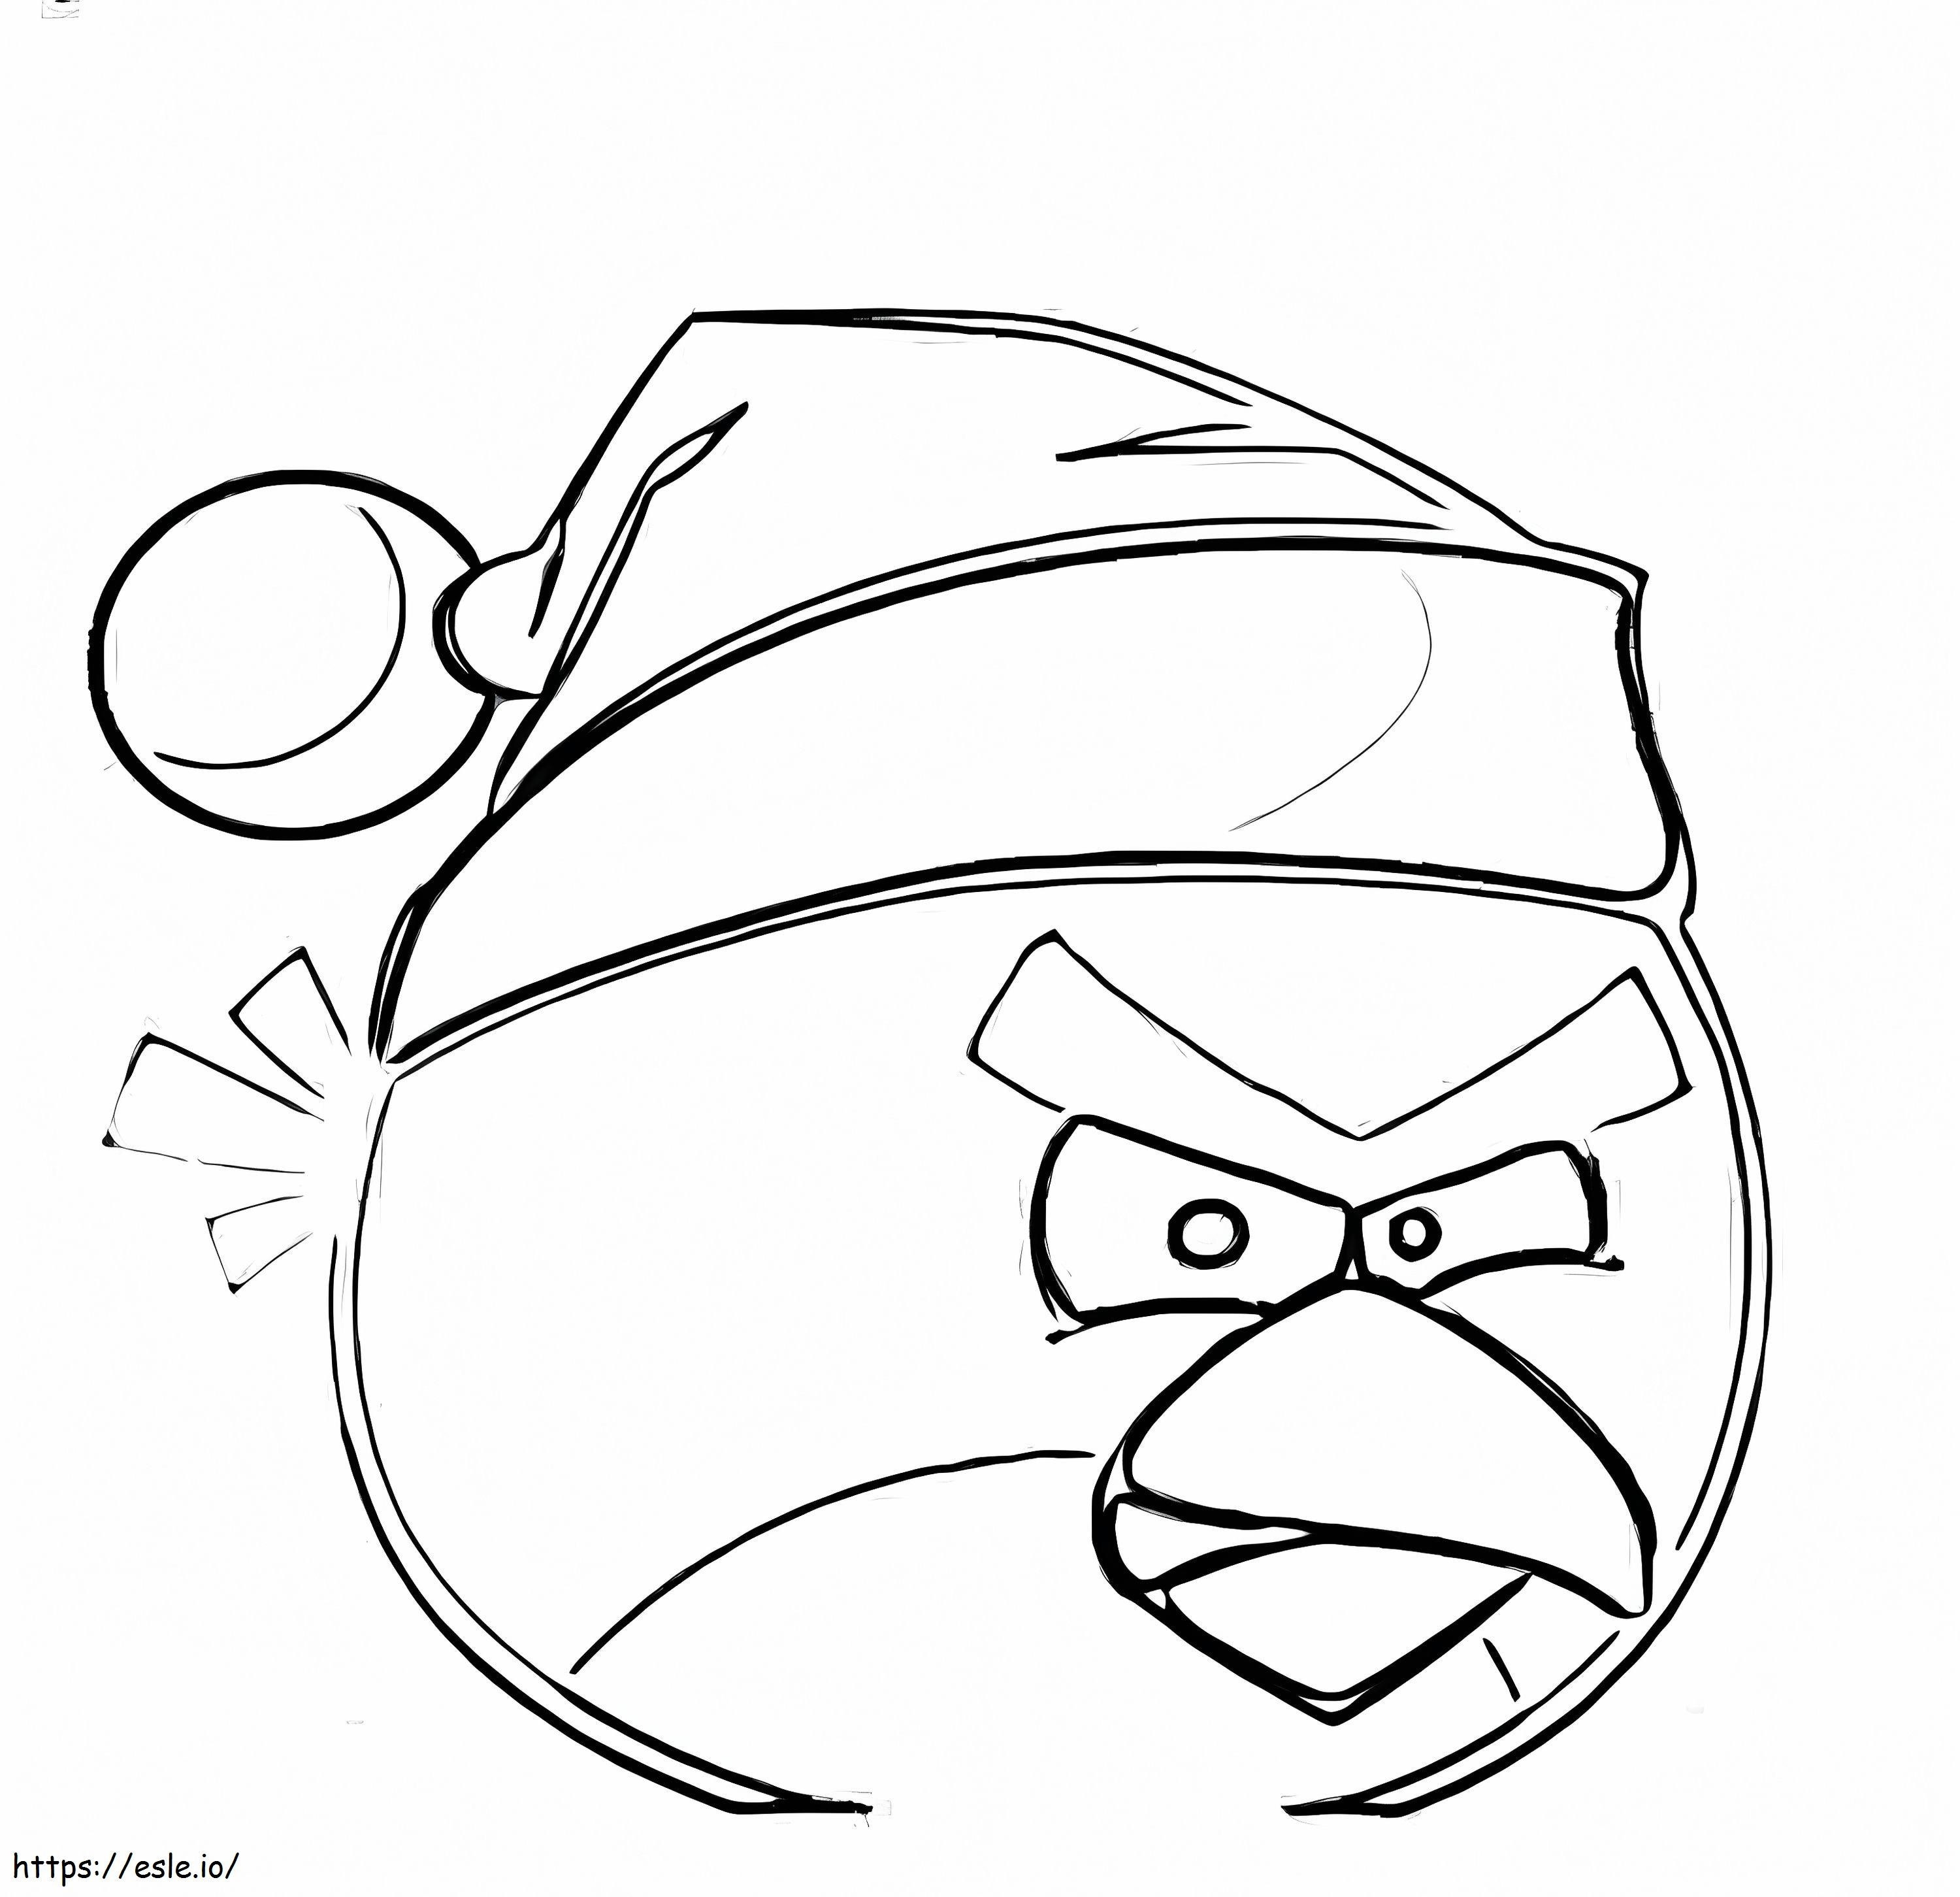 Draw Red Birds At Christmas coloring page